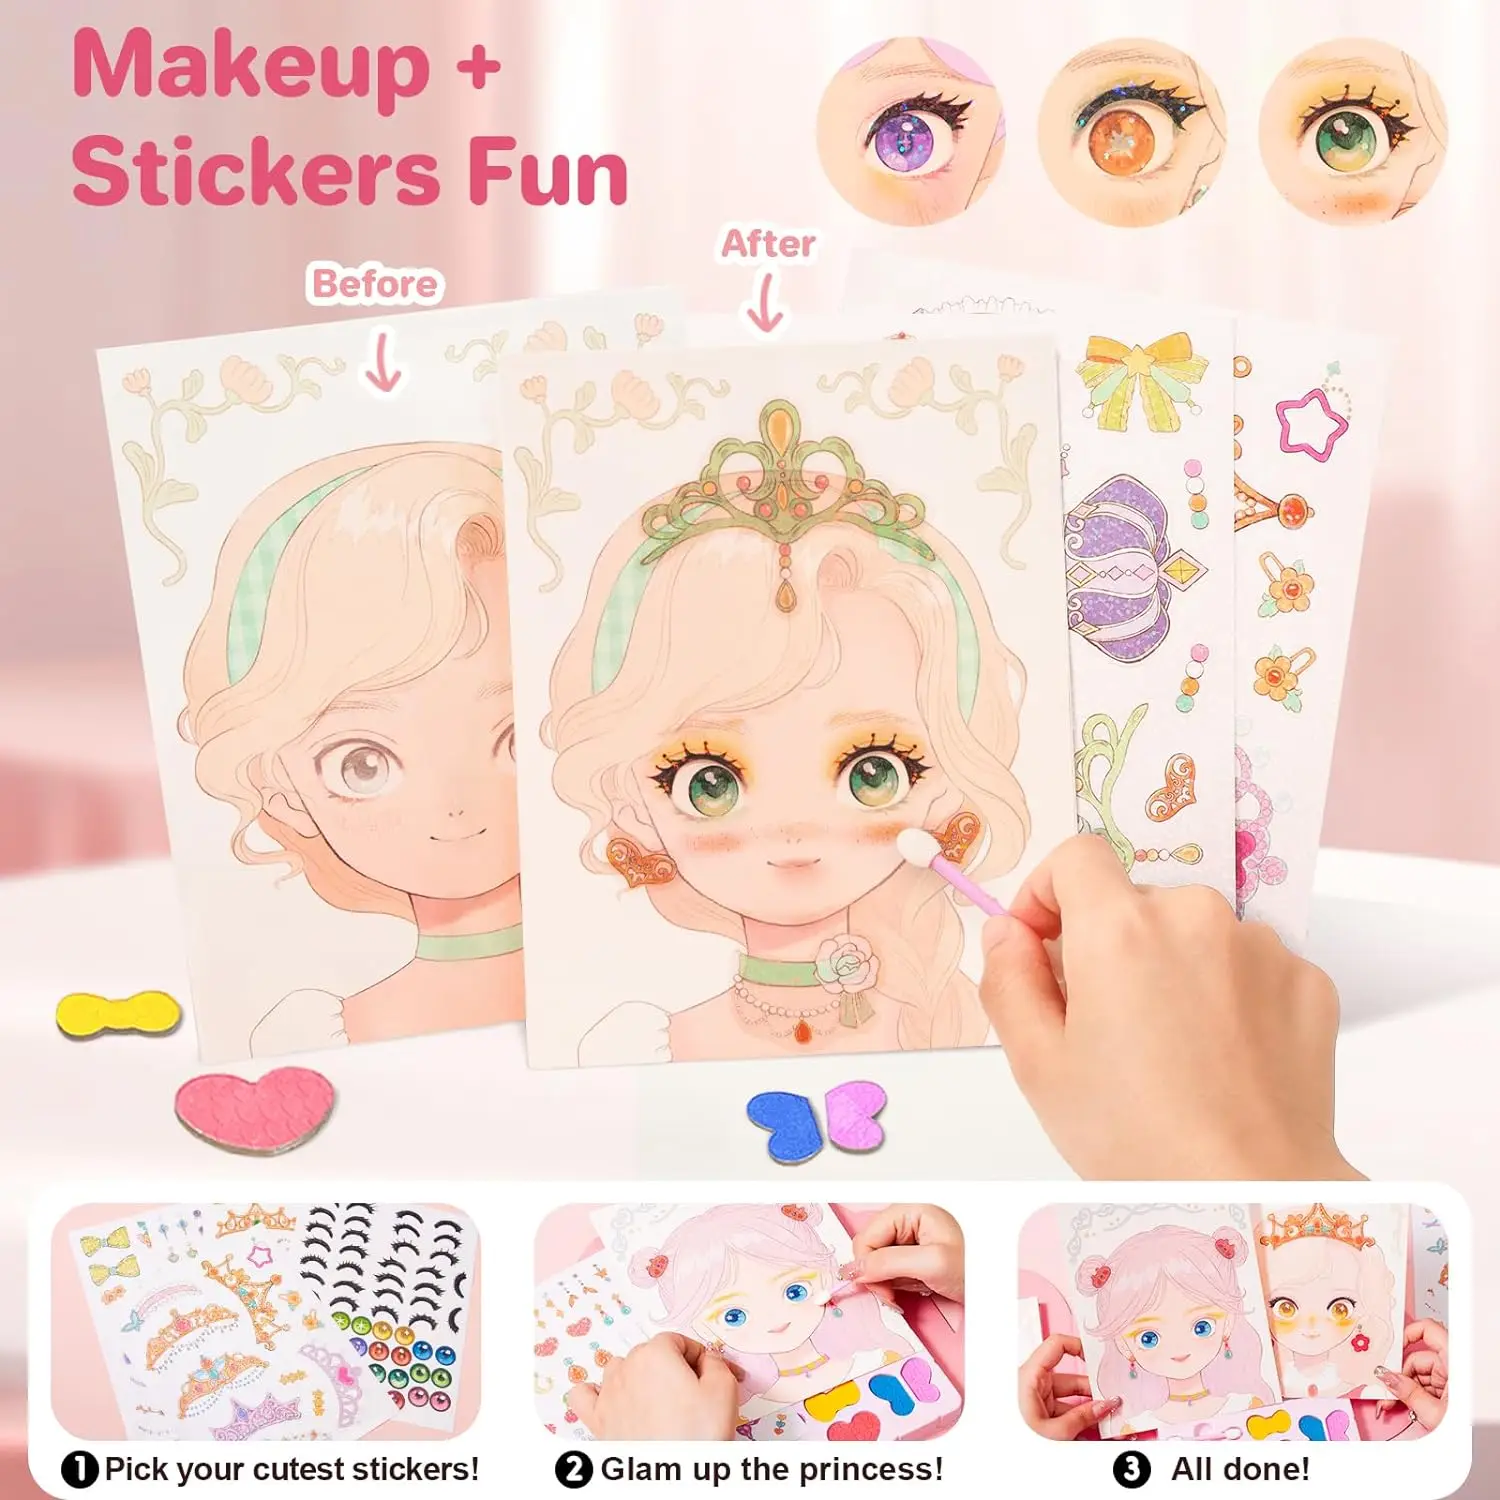 4 in 1 Magic Paper Makeup Fun Kit for Girls Brush Eyeshadow Play on Paper Crafts,Princess Diamond Painting Gifts Toys for Girls